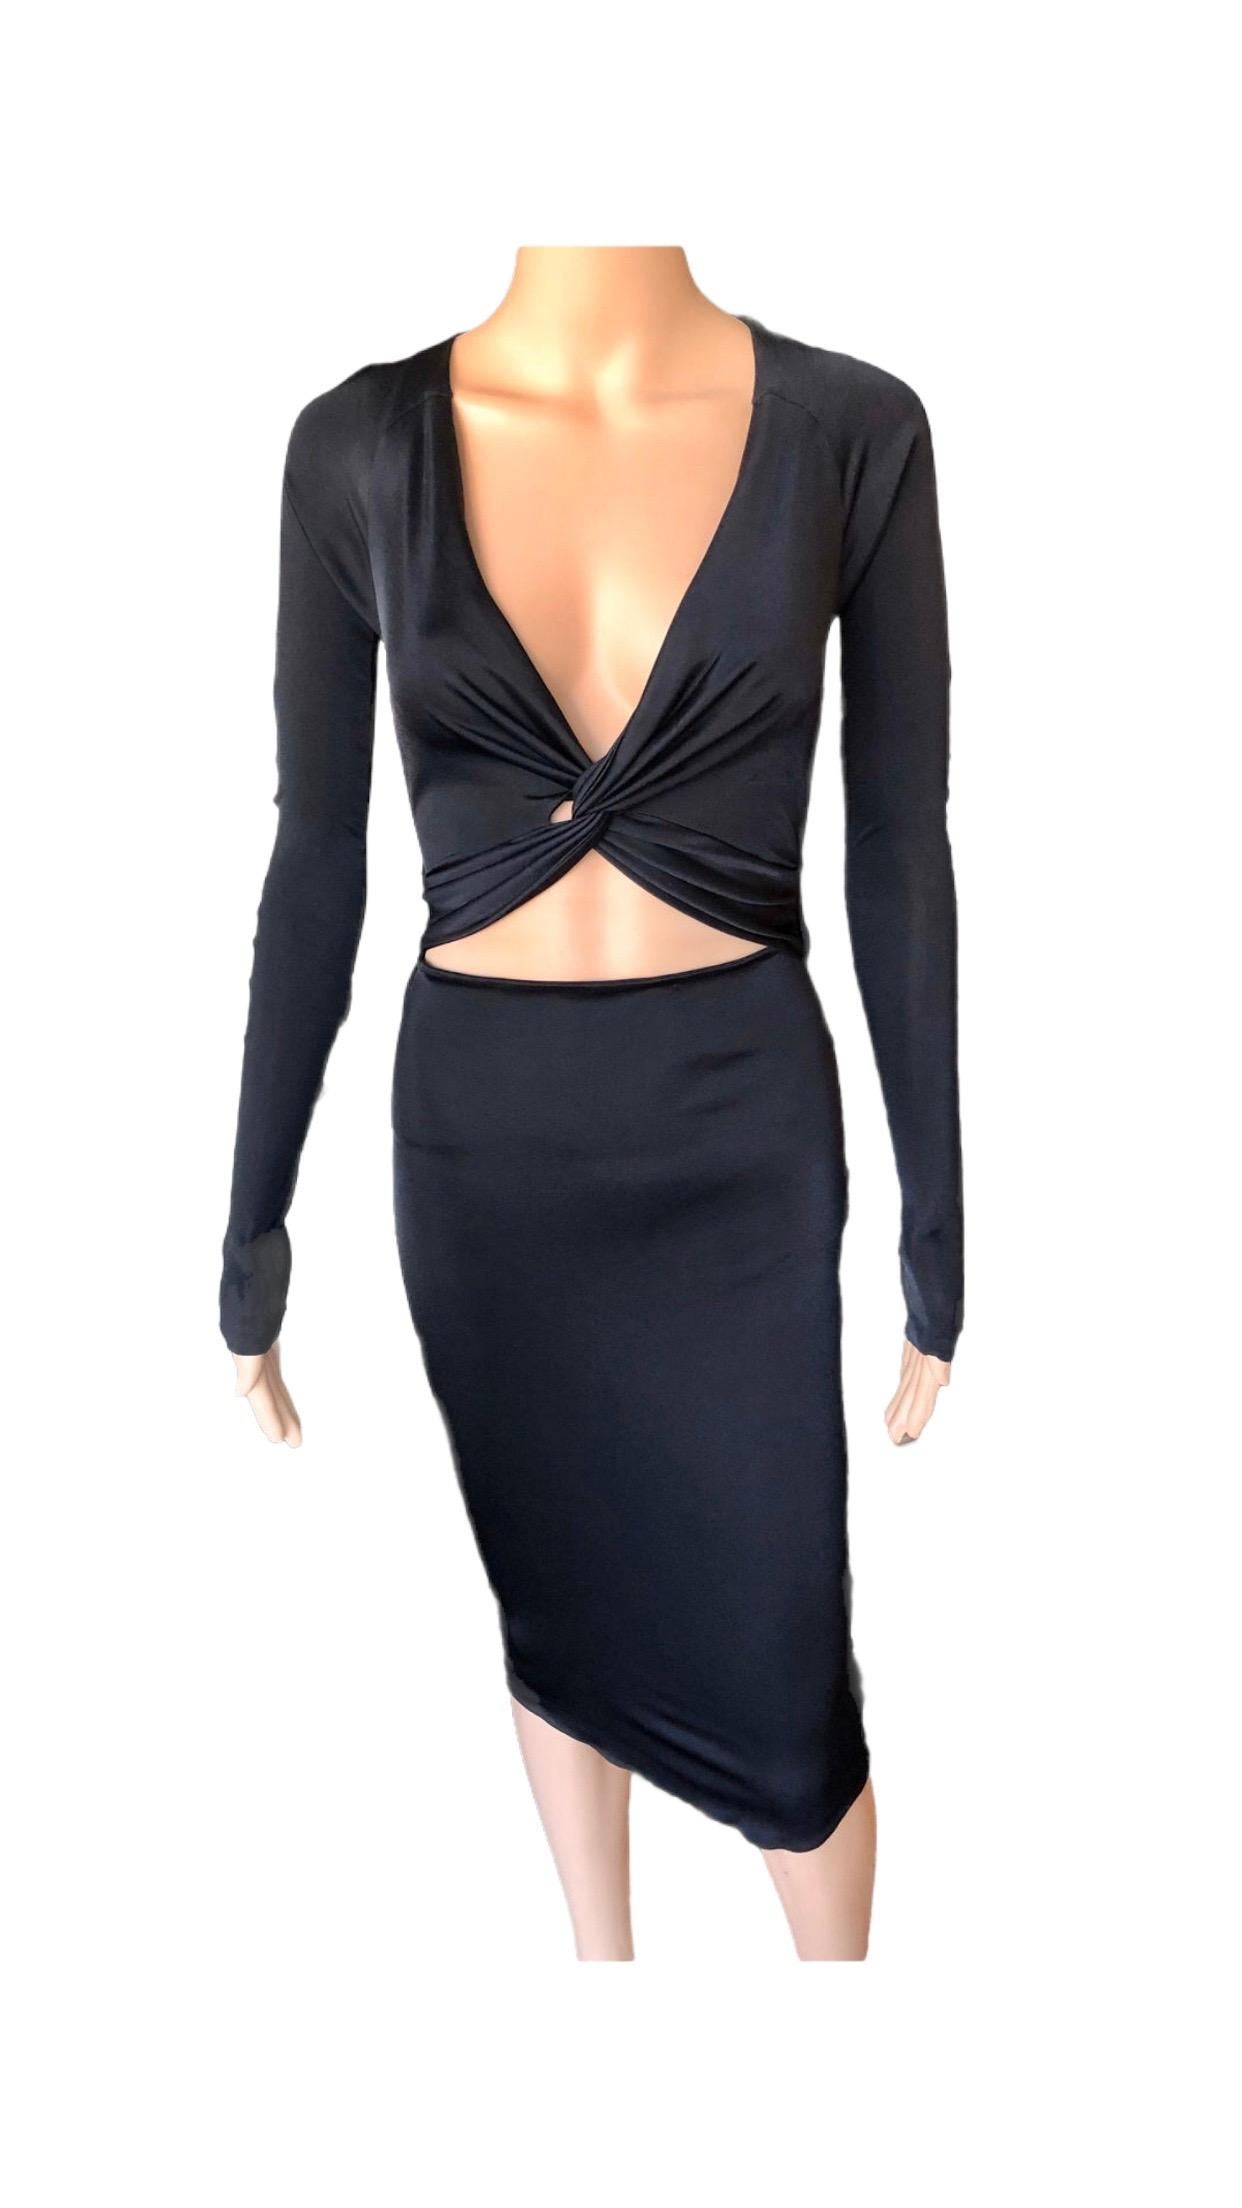 Gucci S/S 2005 Tom Ford Plunging Cutout Backless Bodycon Black Dress For Sale 7